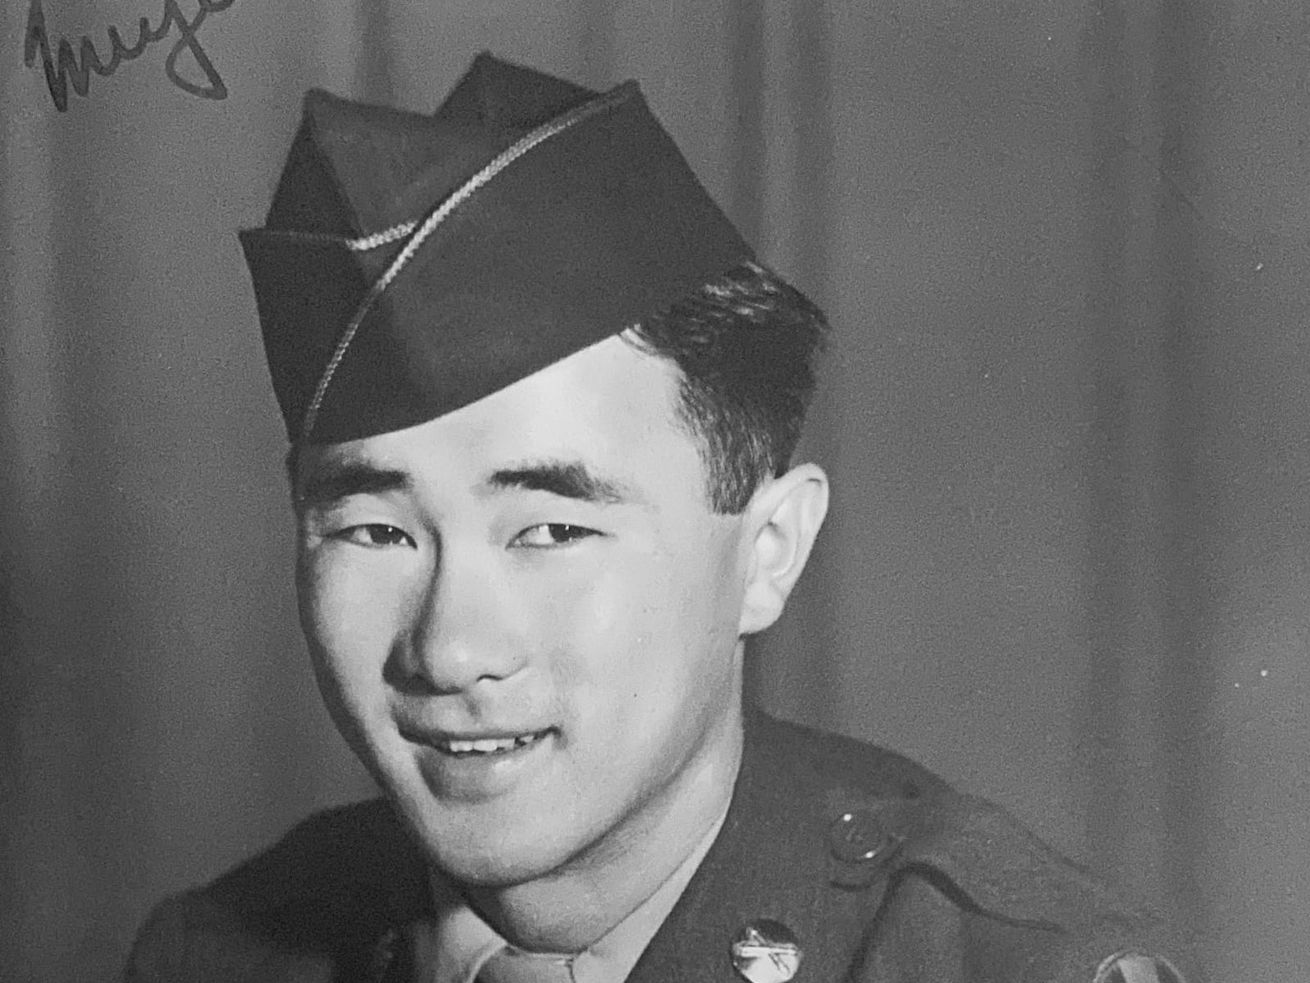 Yosh Yamada enrolled in college after being held at a World War II internment camp for Japanese Americans. But soon he was drafted into the Army.